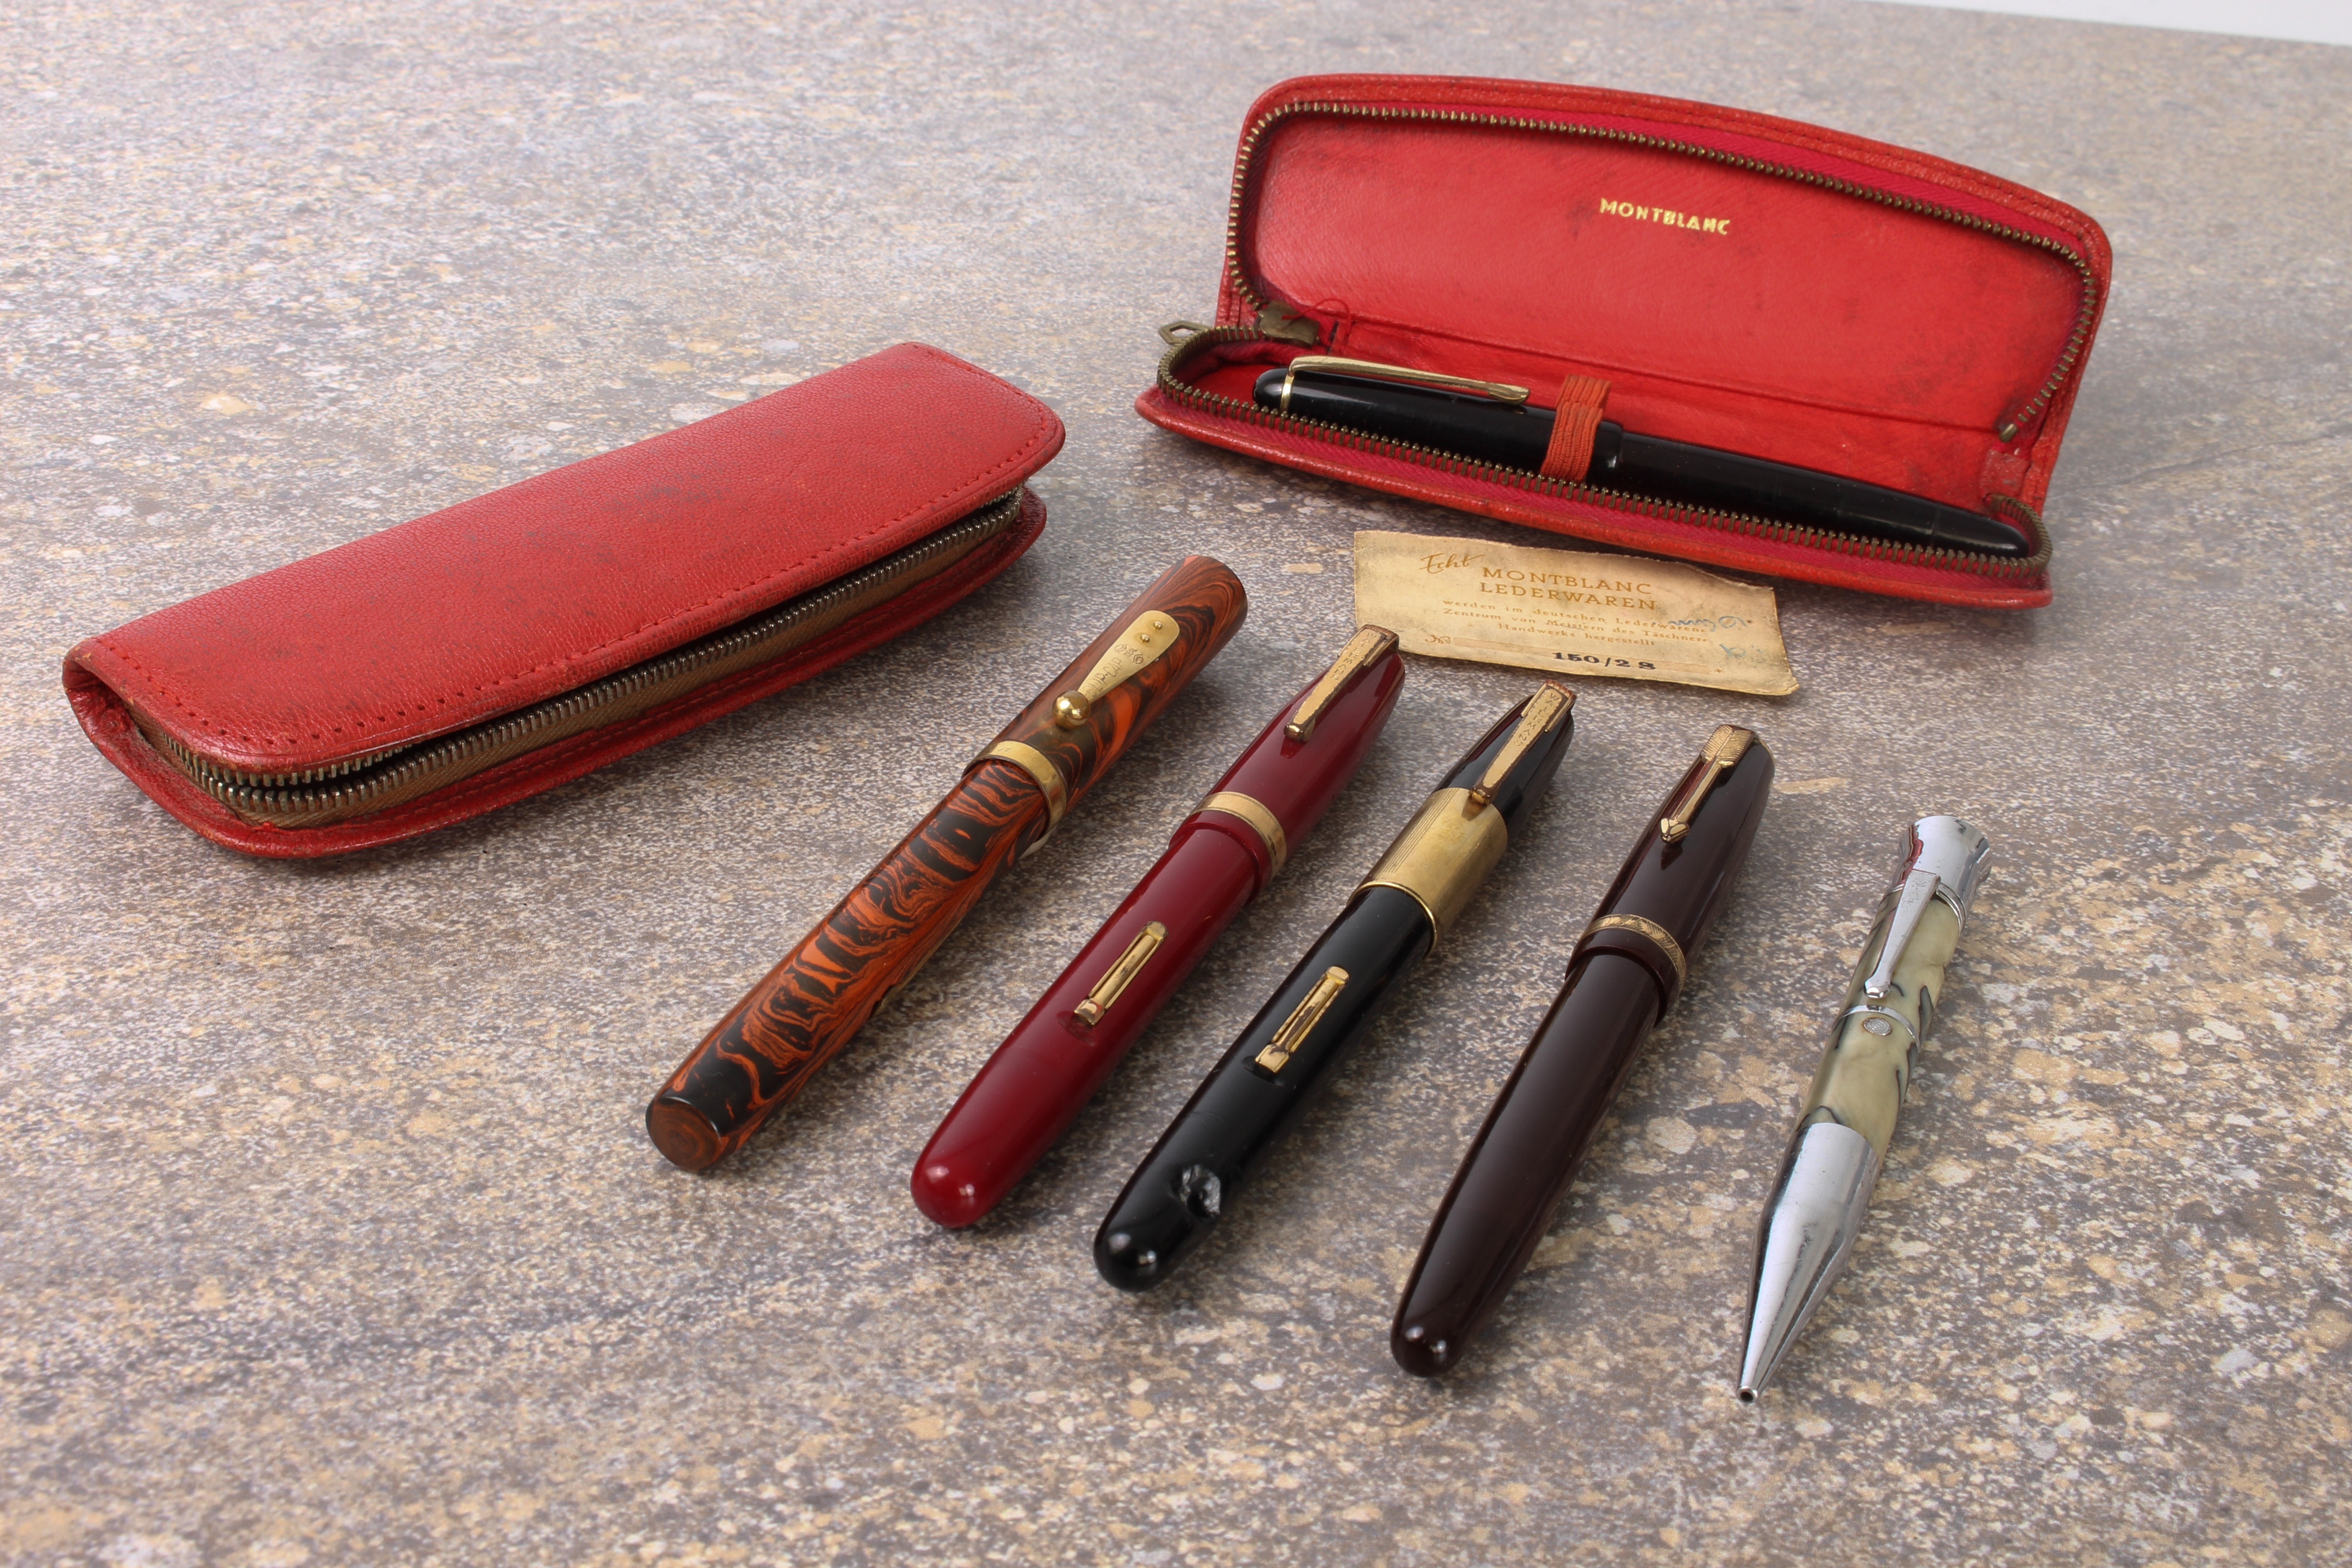 Five vintage fountain pens and a propelling pencil: a Mont Blanc 342 piston filler with red